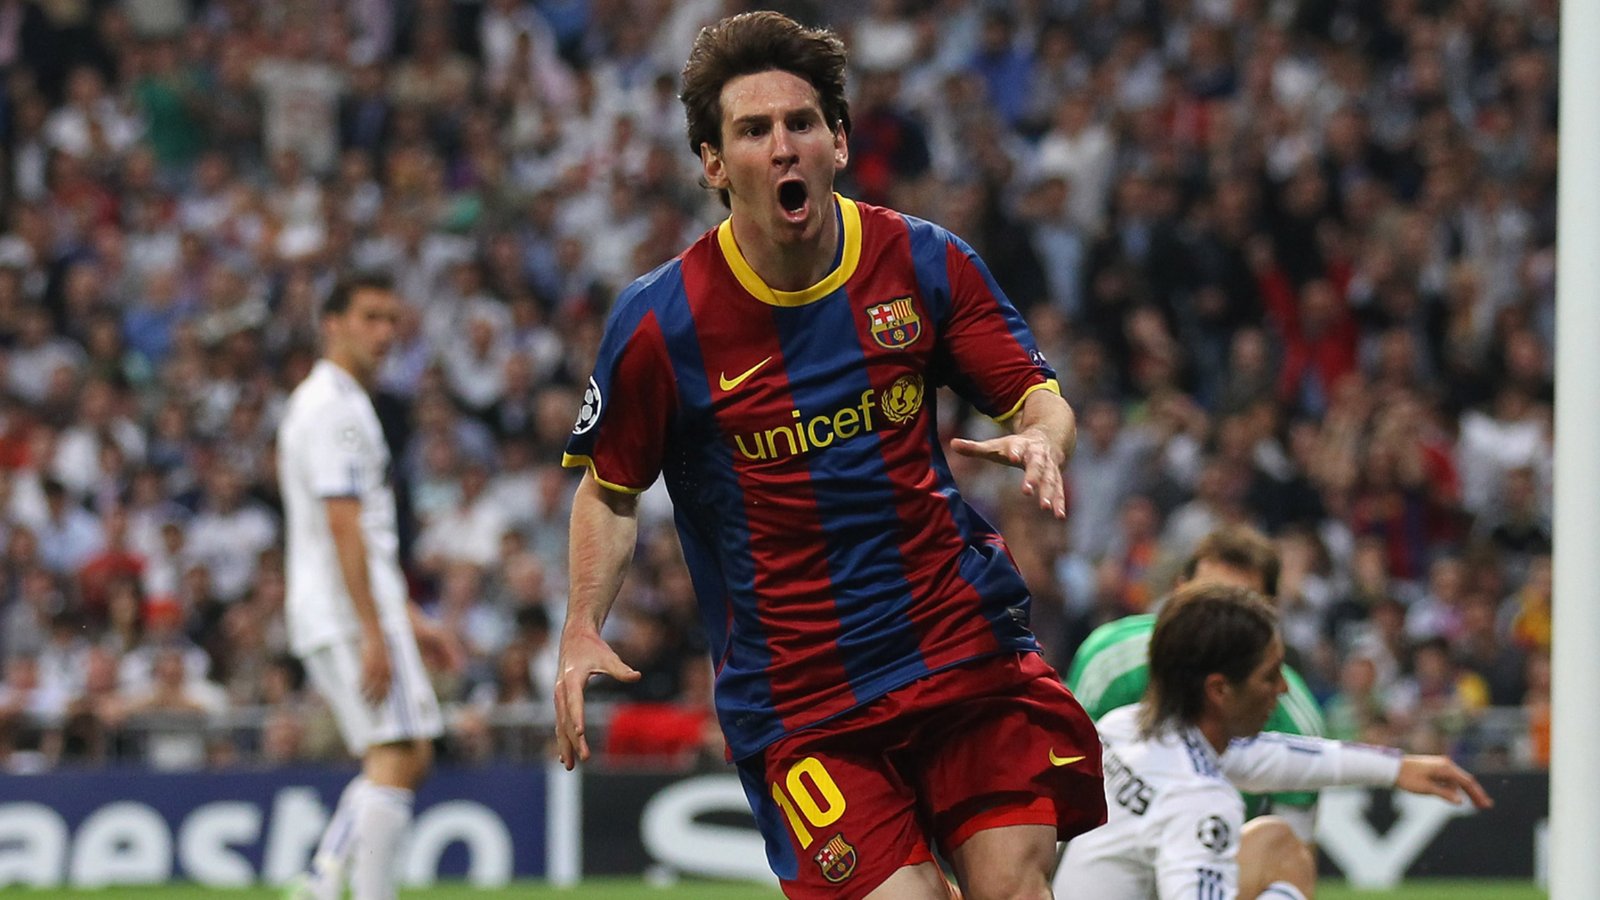 Messi dismantles Real Madrid with a brilliant solo goal at the Bernabeu in the UCL semi-final